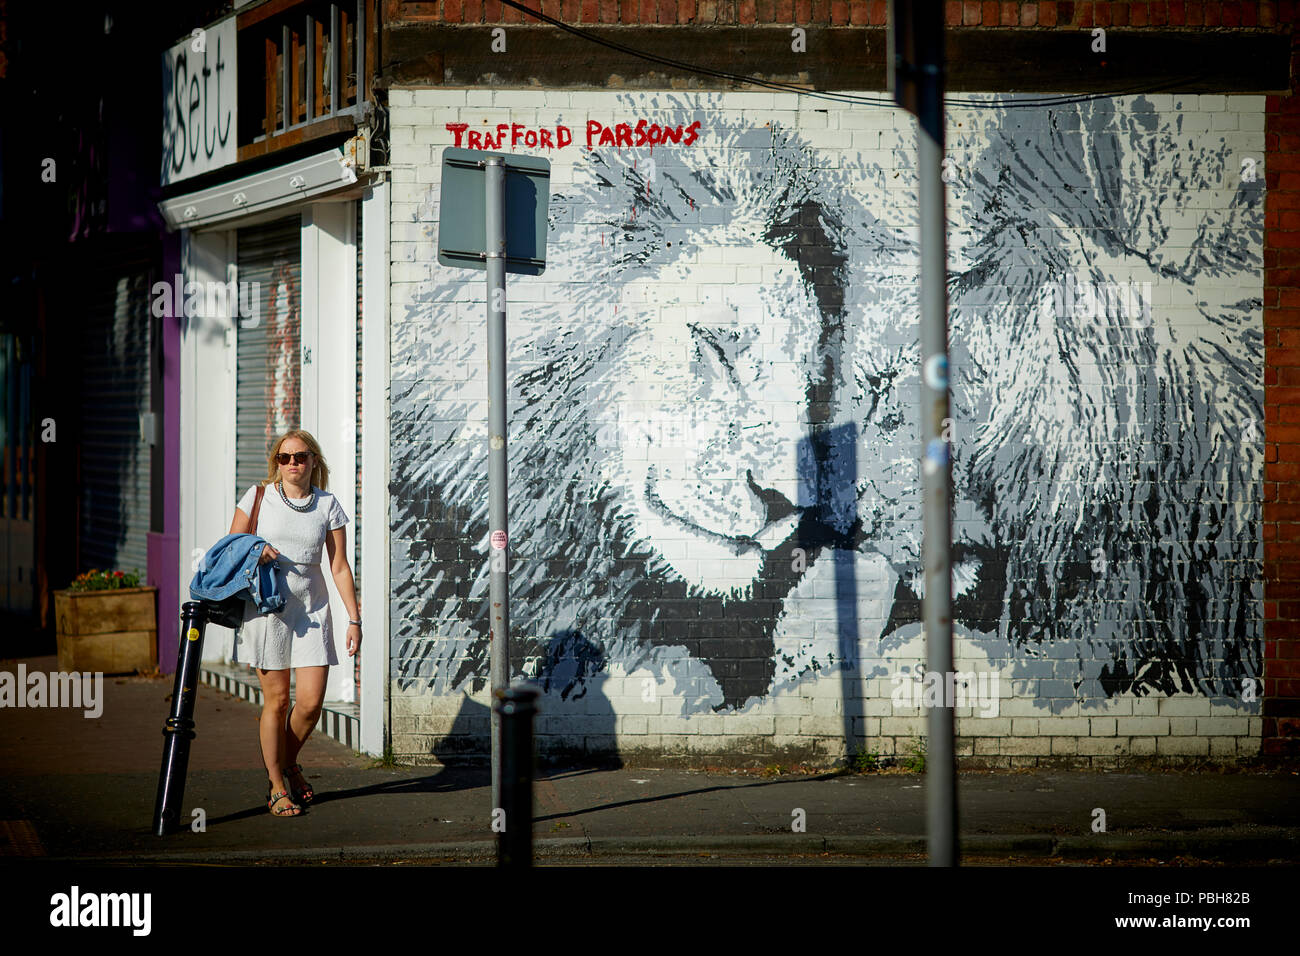 Burton Road west Didsbury, south Manchester lion mural street art by Trafford Parsons Stock Photo